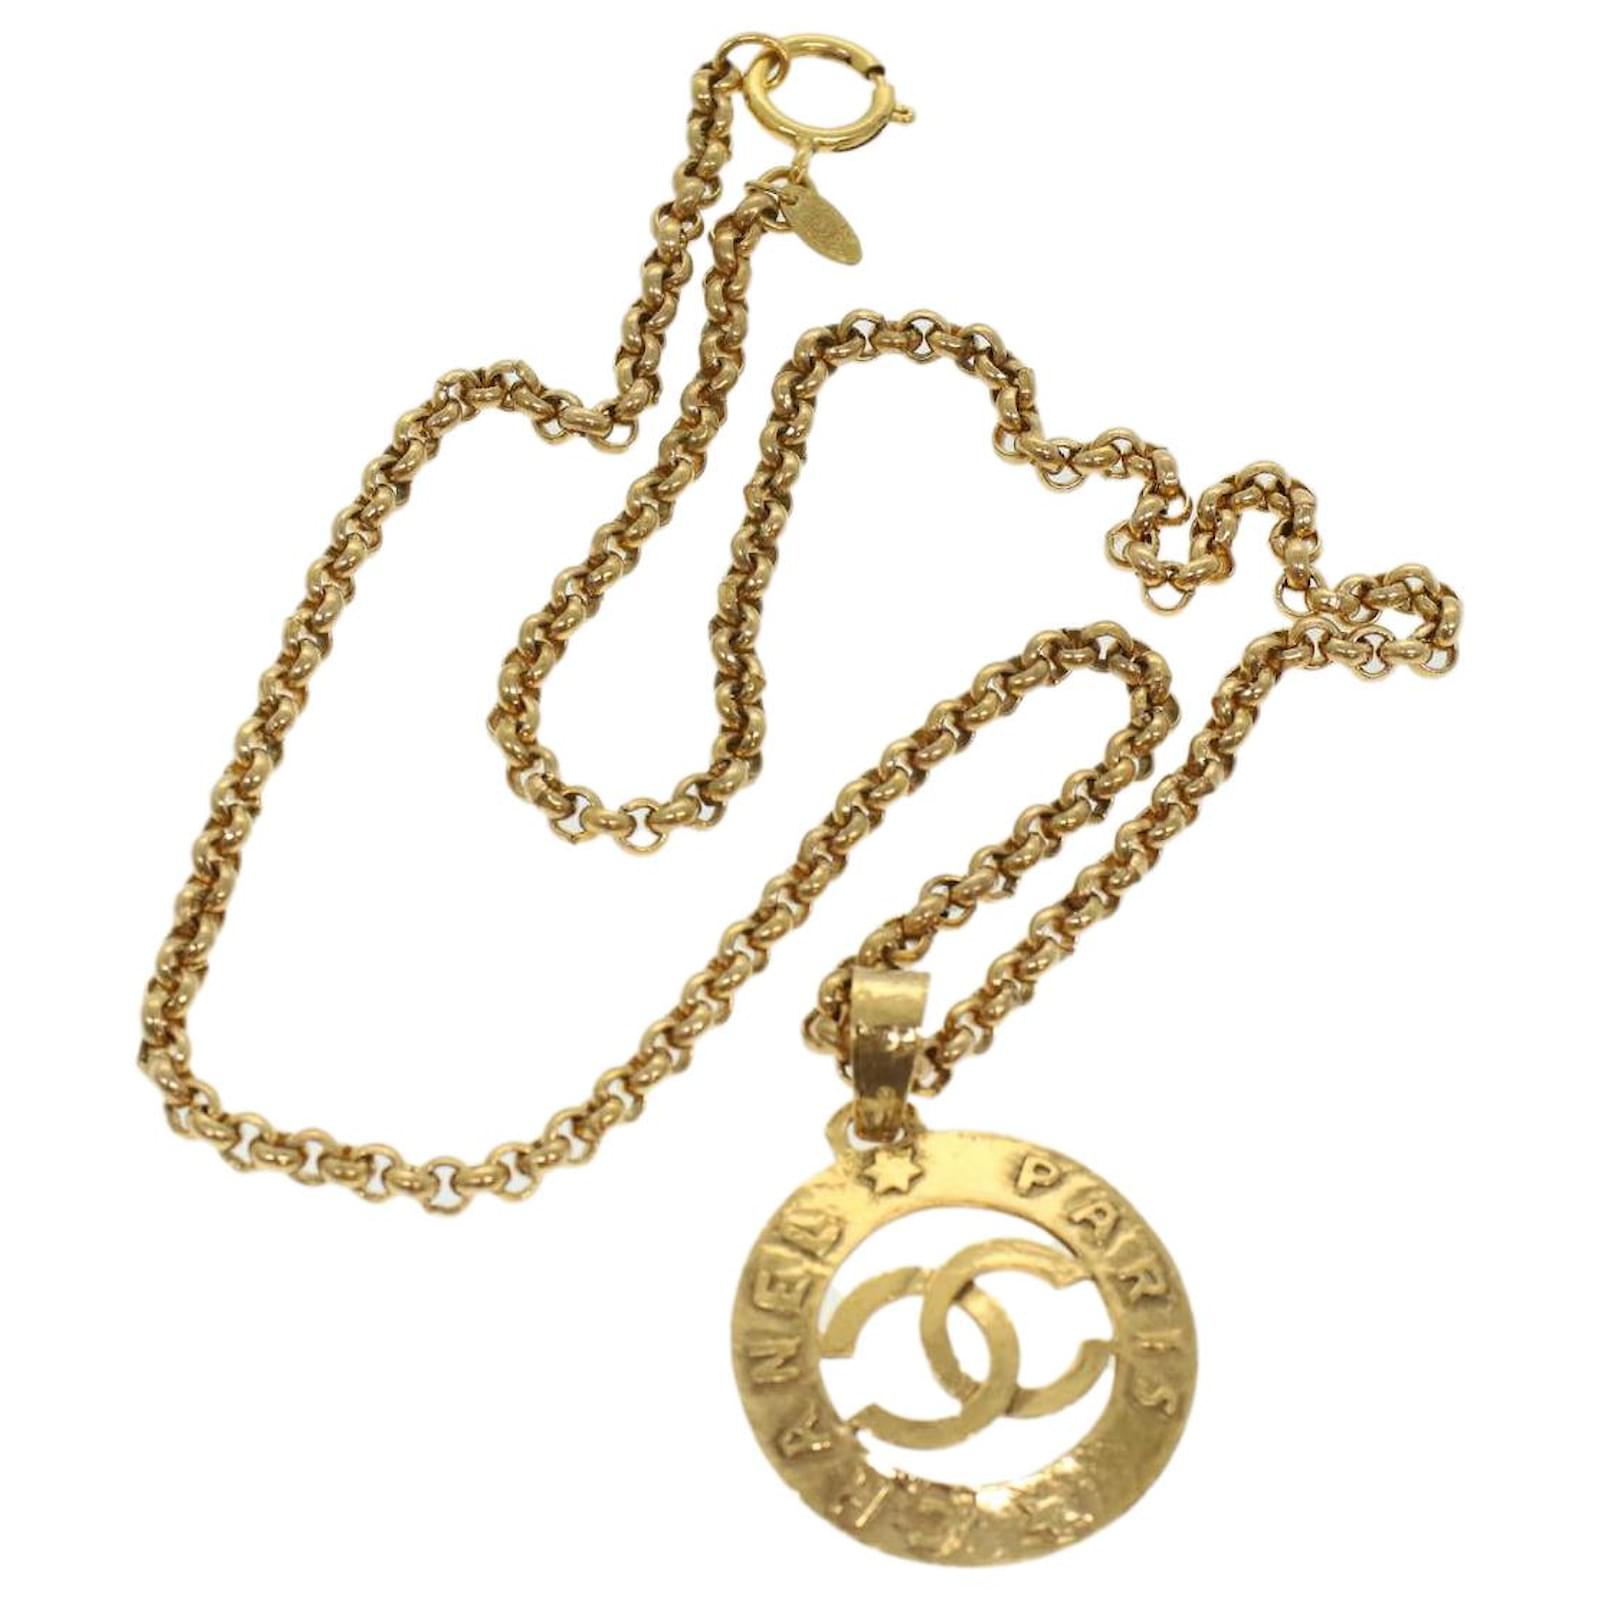 Chanel Necklace Cc Logo, Chanel Inspired Necklace Cc